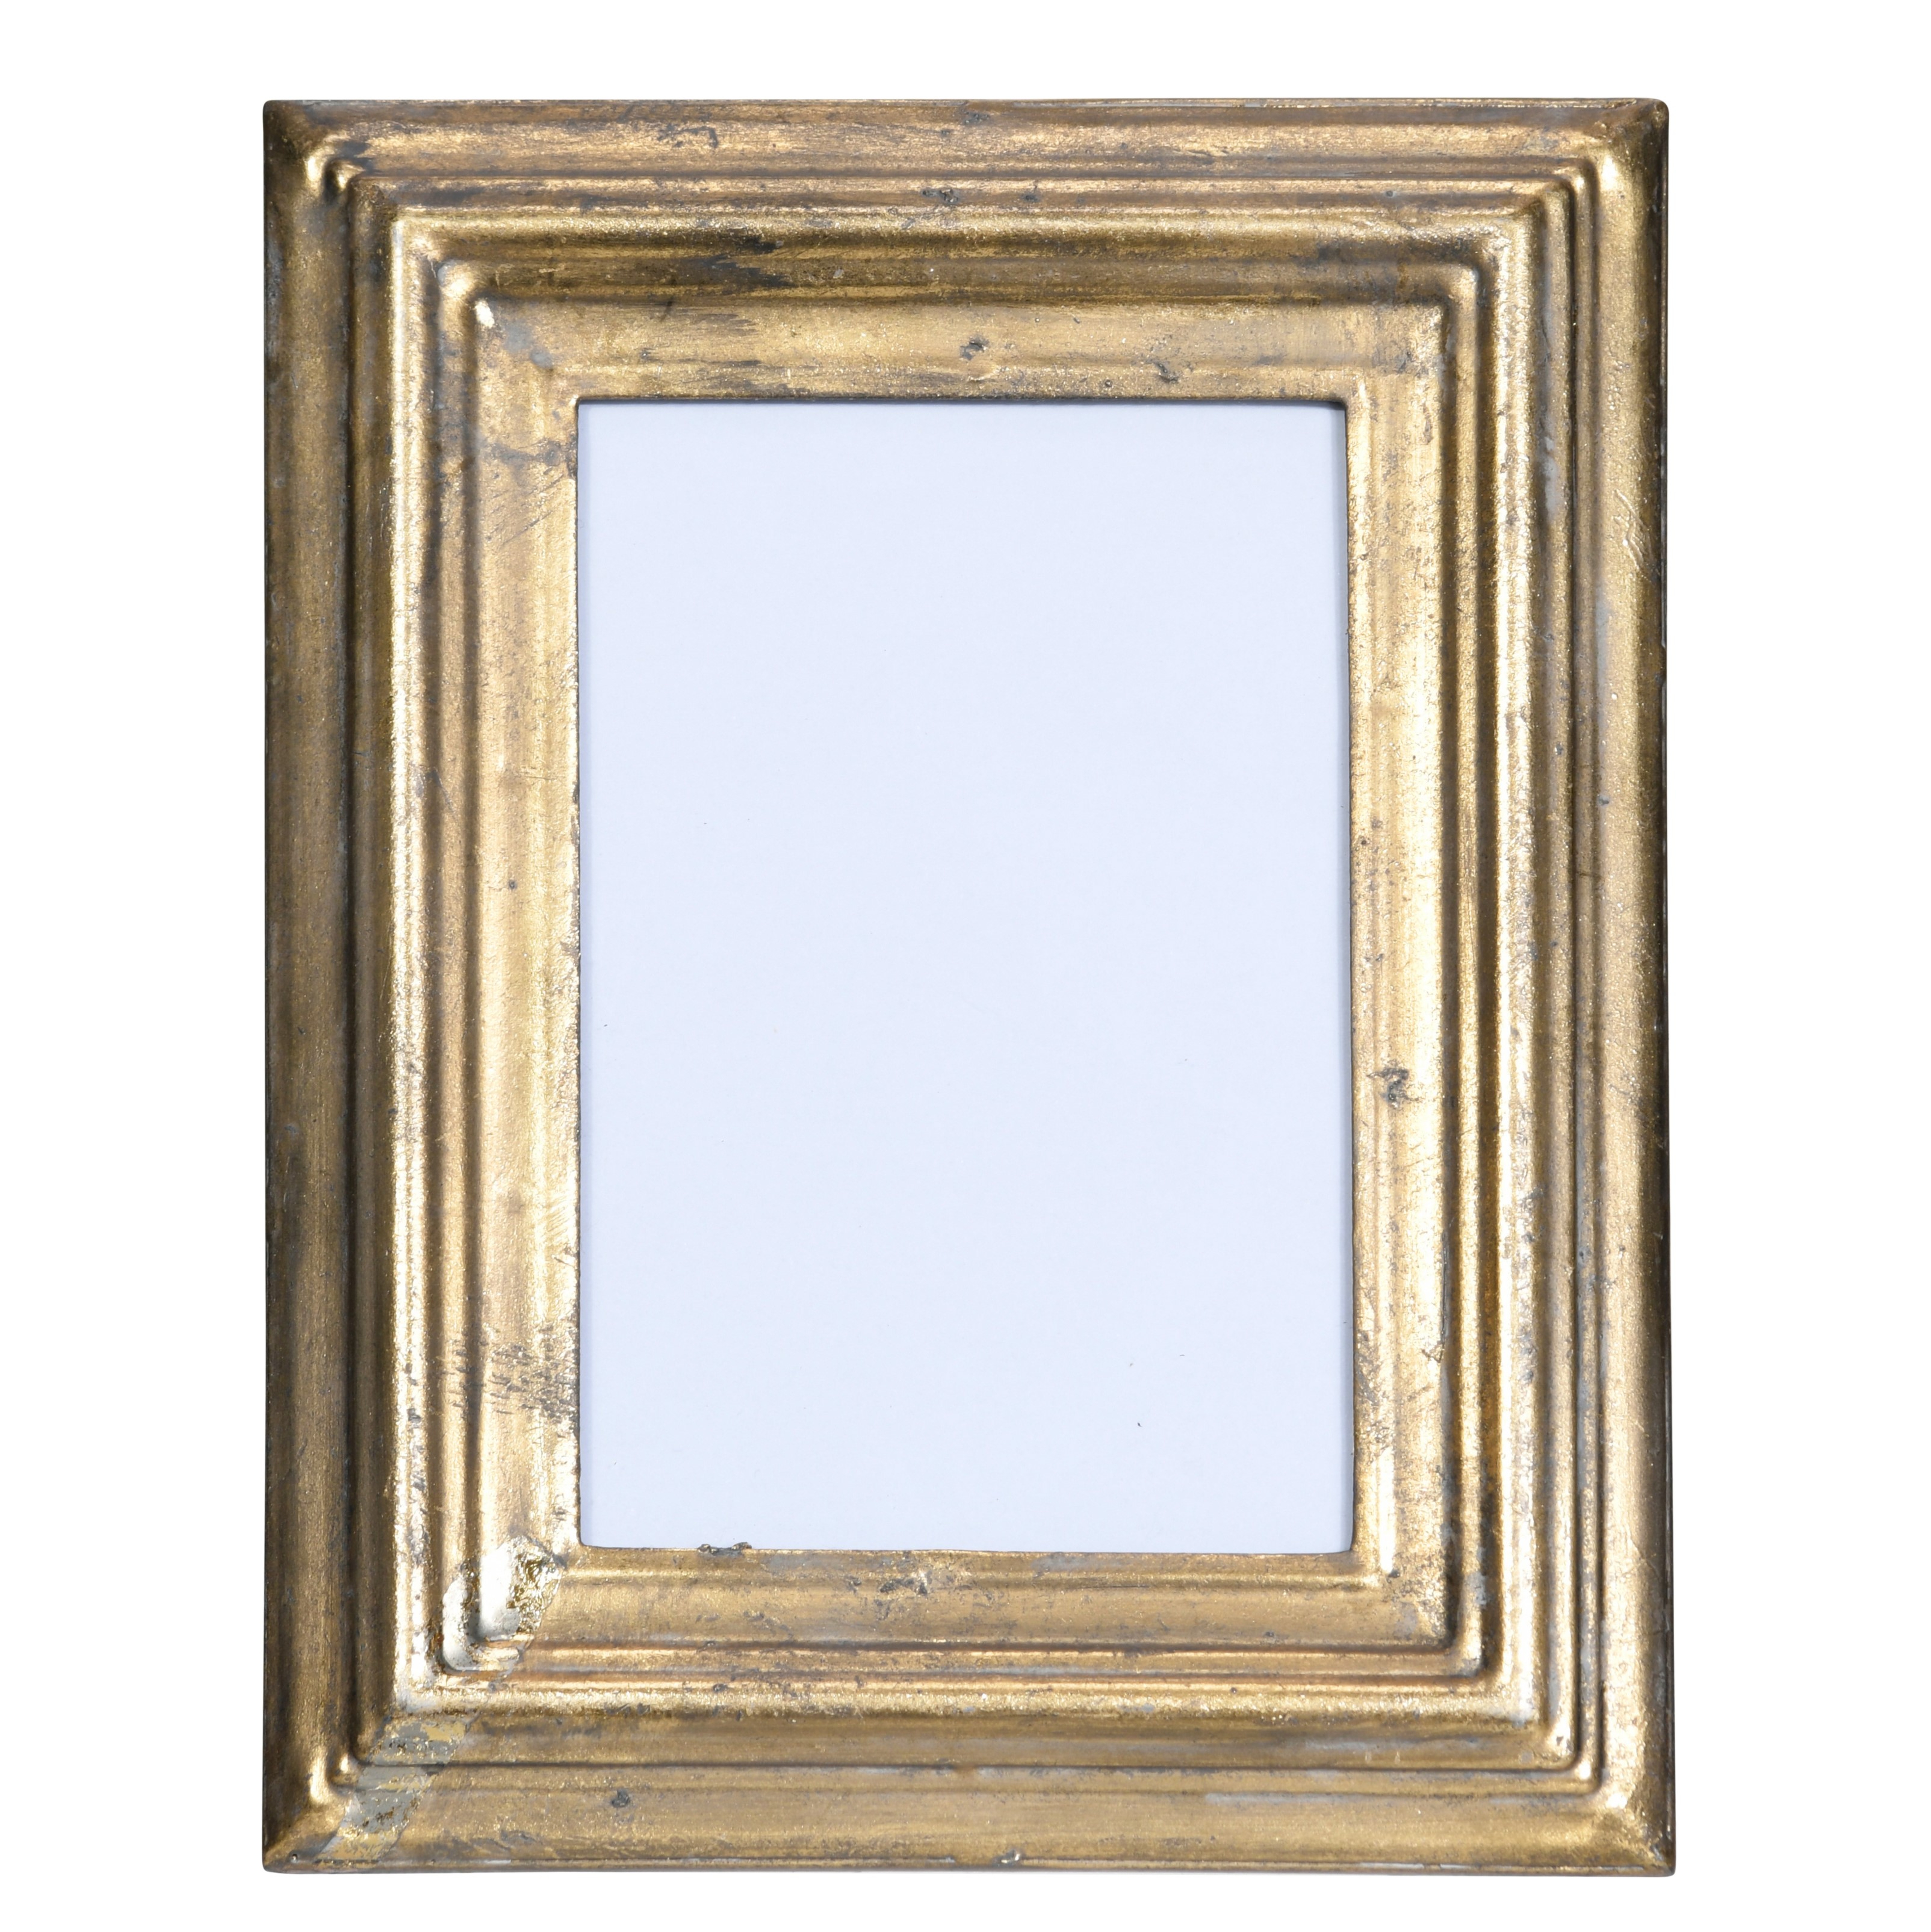 Antiqued Metal Picture Frame, Gold, 4" x 6" Photo - Nomad Home